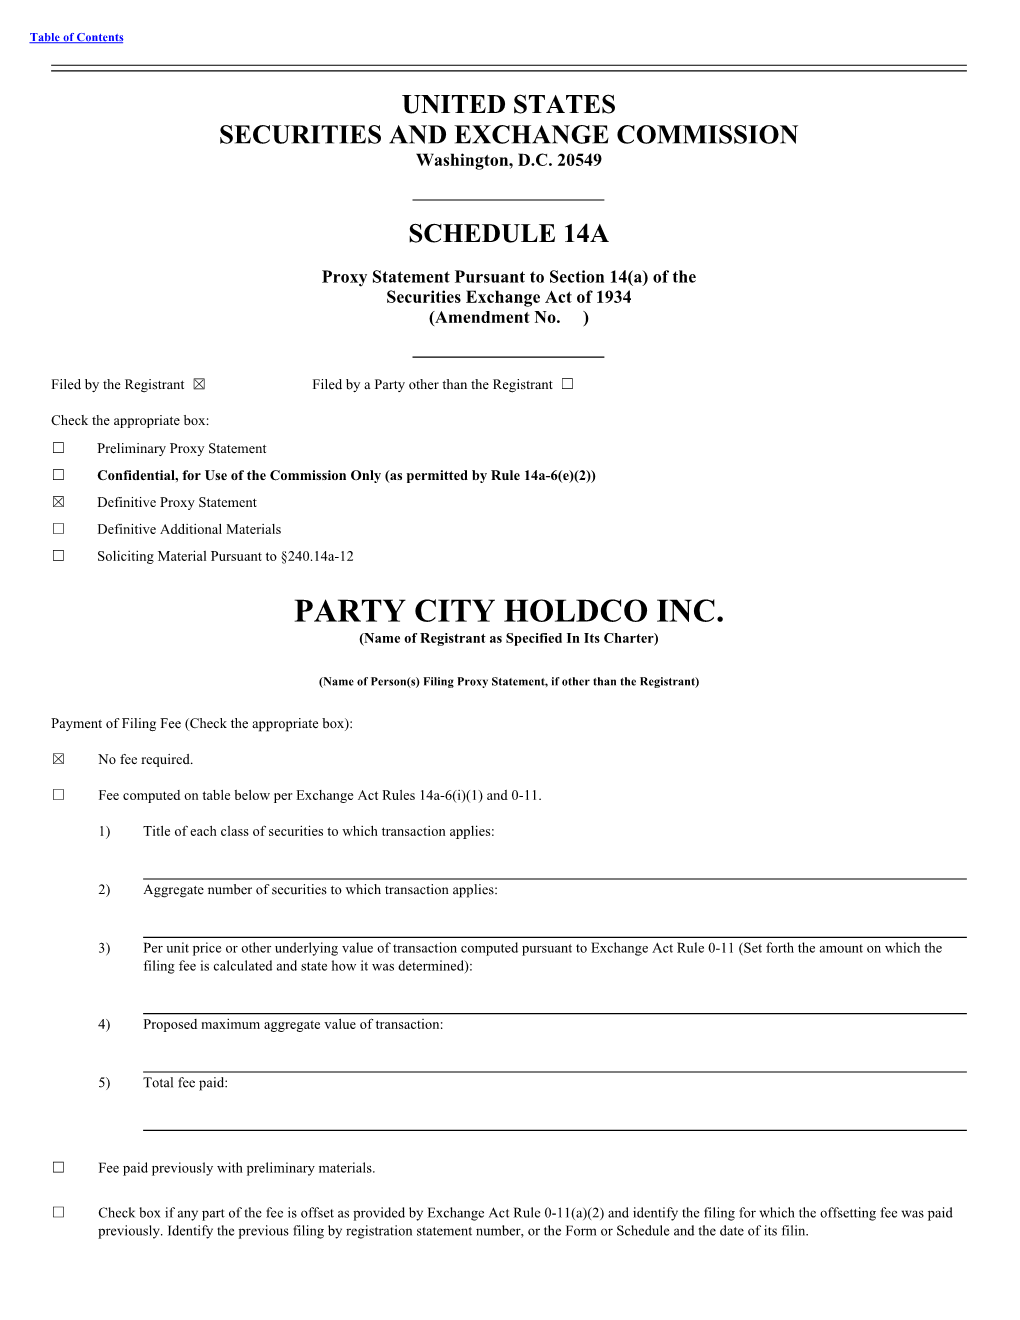 PARTY CITY HOLDCO INC. (Name of Registrant As Specified in Its Charter)